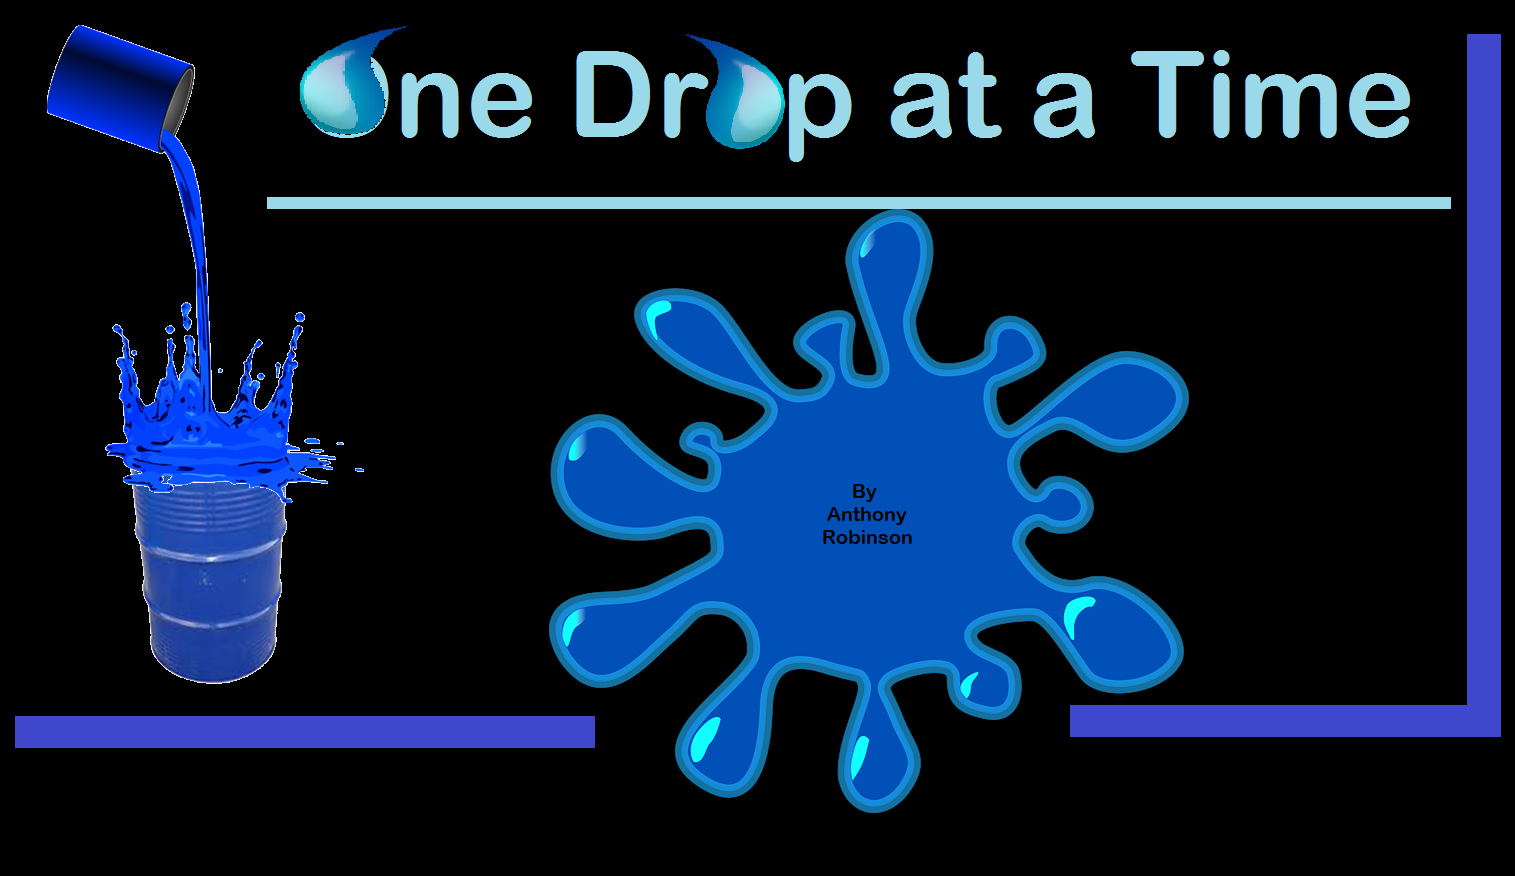 One Drop at a Time